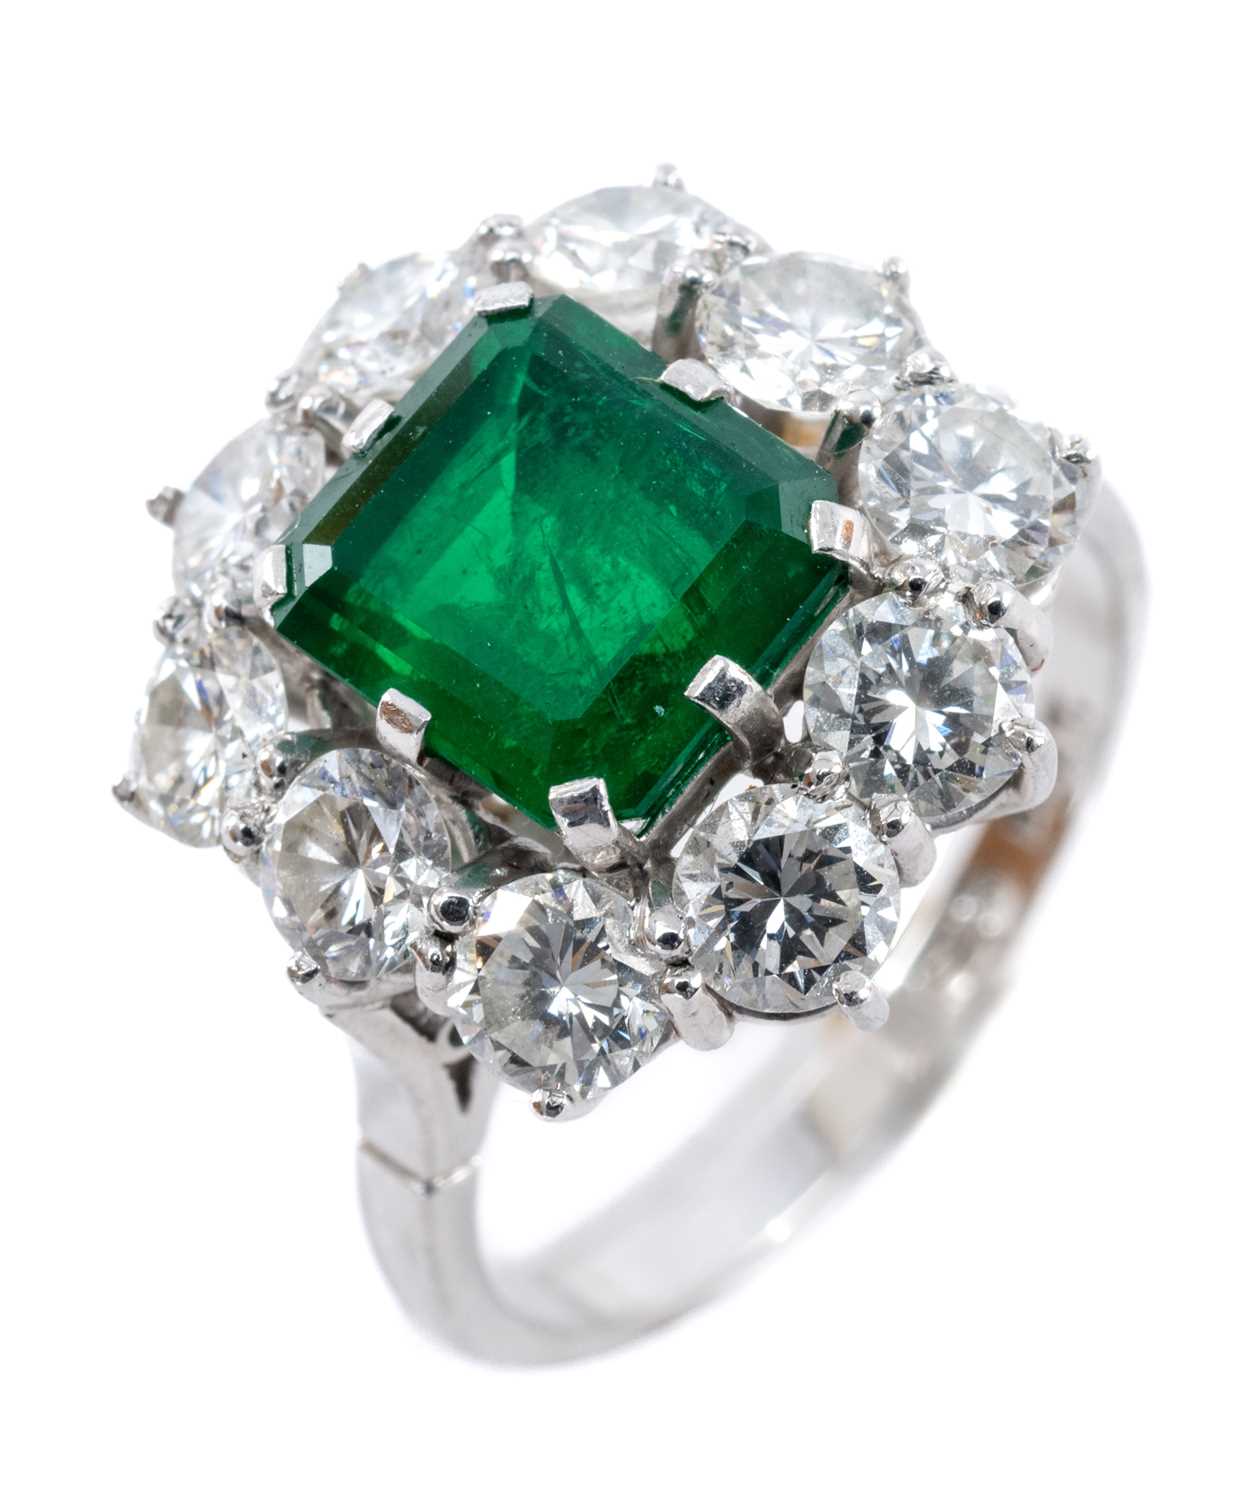 PLATINUM EMERALD & DIAMOND CLUSTER RING, the central emerald (7 x 8mms approx.) measuring 2.2cts - Image 2 of 2